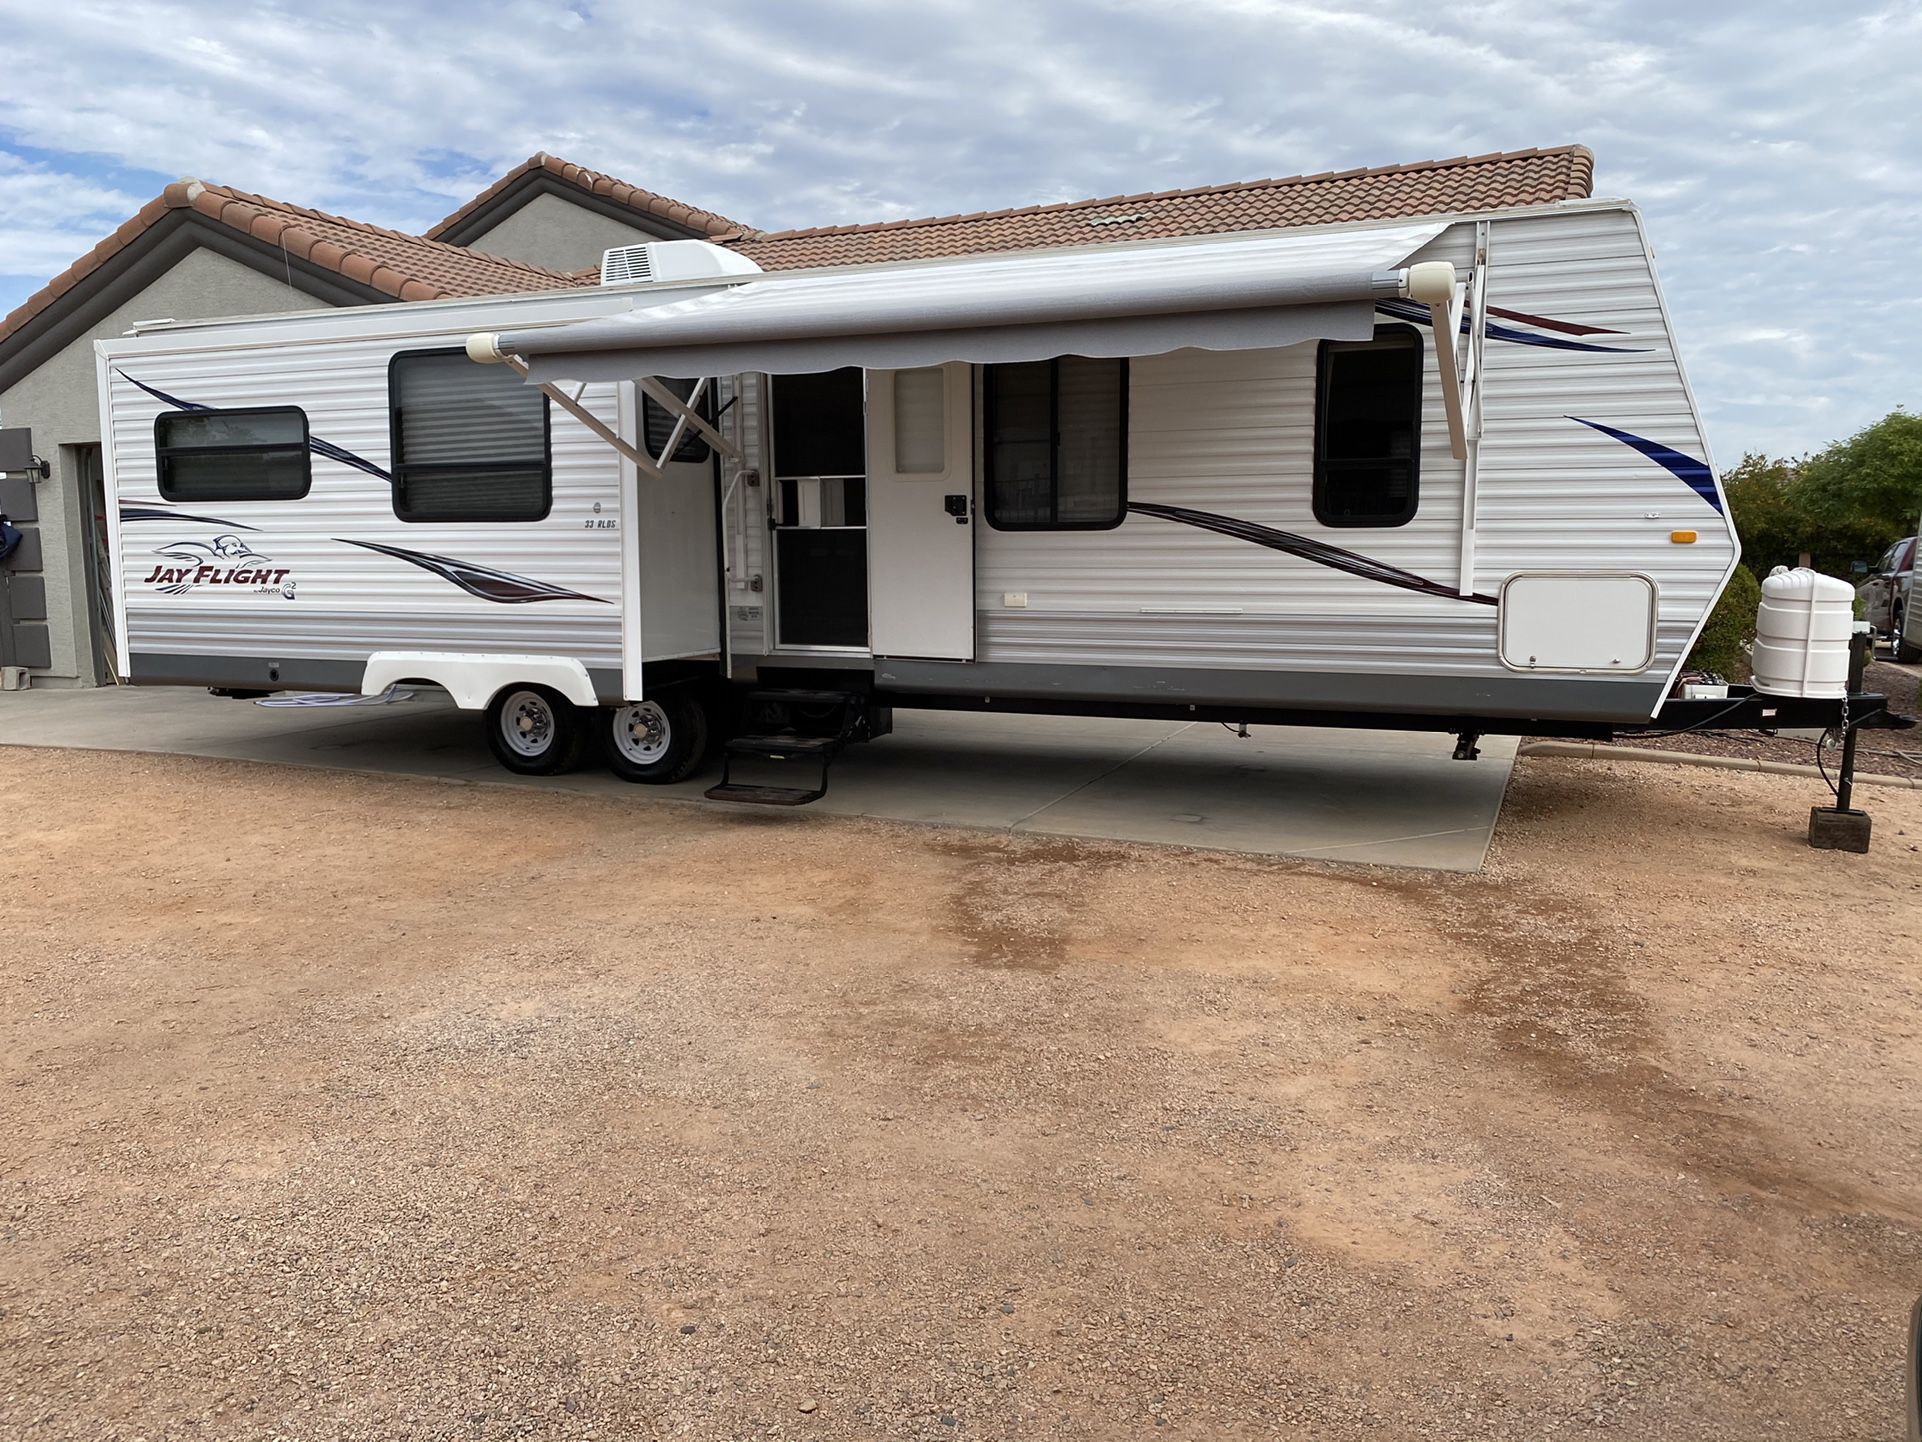 2012 JACO JAY FLIGHT 32FT.1 OWNER. USED 3X. WITH 2 SLIDE OUTS. BOTH ARE 16FT LONG. ONE SIDE HAS TABLE WITH 4 CHAIRS & QUEEN SOFA SLEEPER OTHER SLIDE